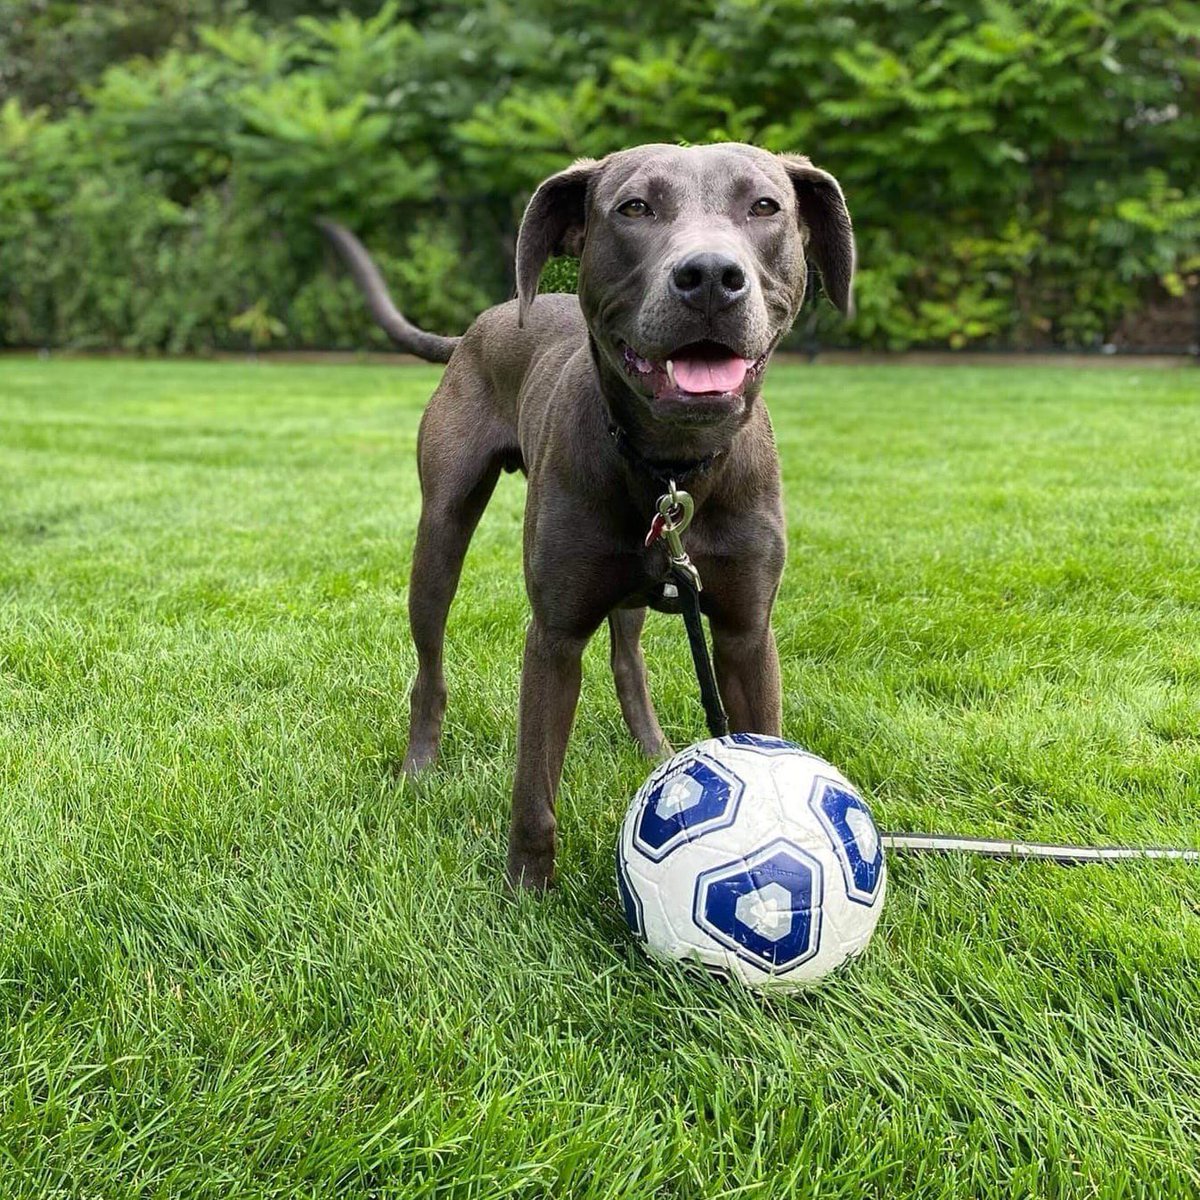 Tripp would like to know if there’s room on your #soccer team for a very handsome midfielder; he promises he will bite the ball only once or twice per offense ⚽😬. Learn more about this sporty hippo on our website at lasthopek9.org/adopt! #adoptable #adoptabledog #lasthopek9